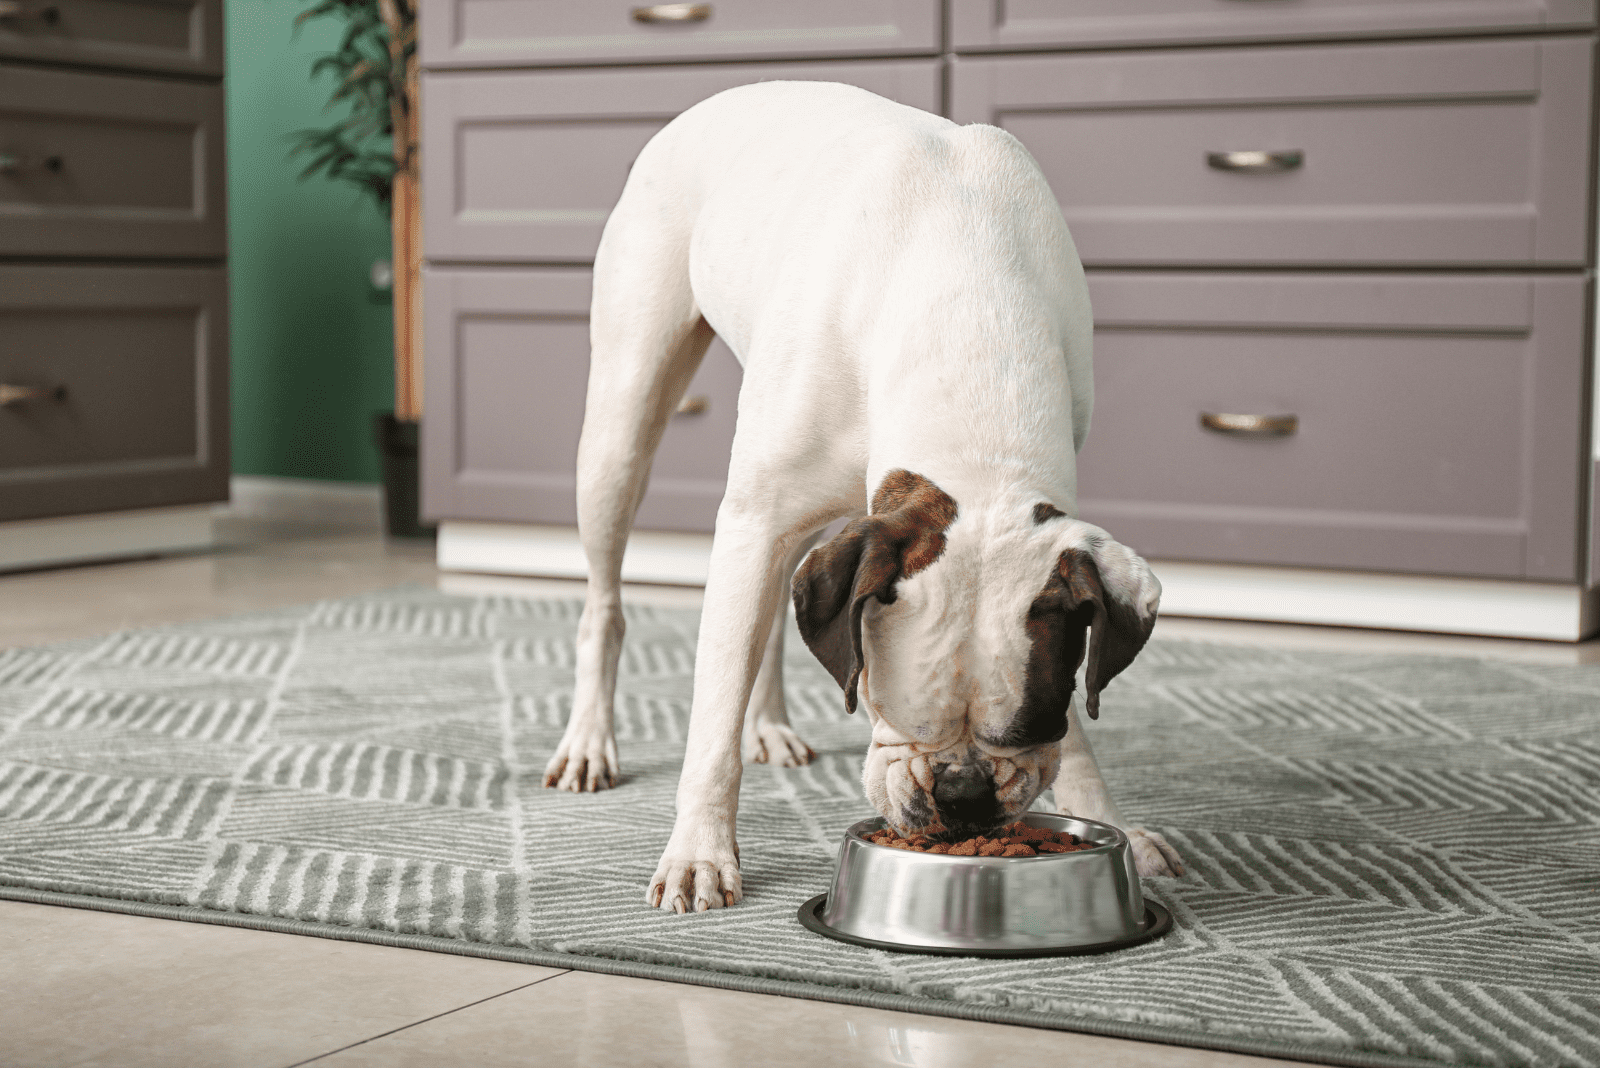 the dog eats food from the bowl 